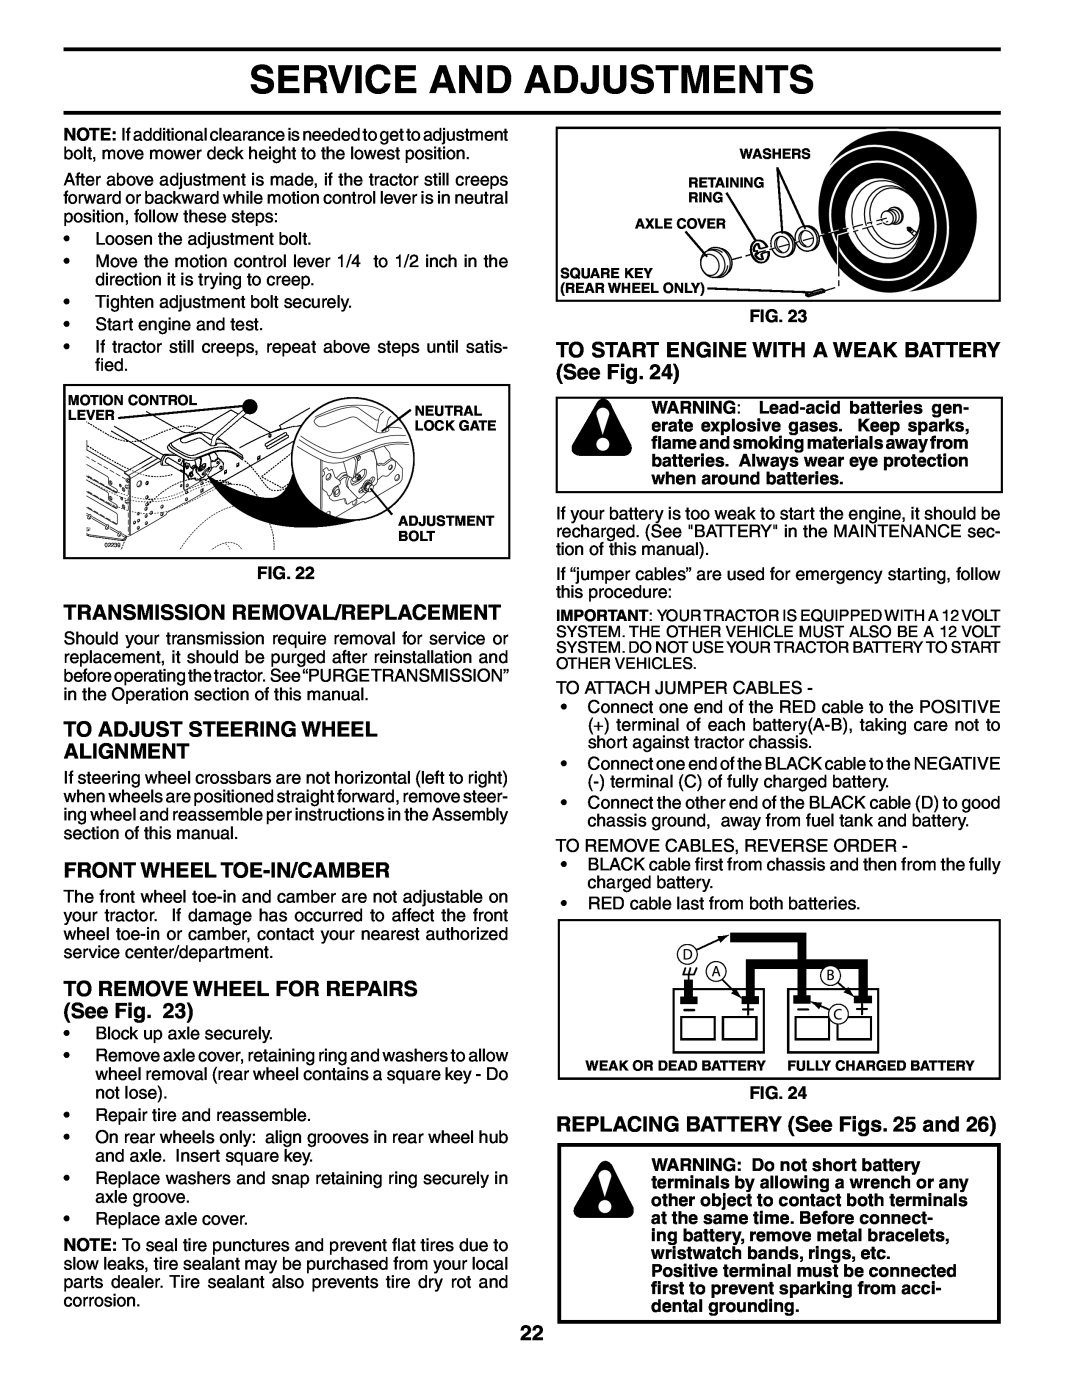 Poulan 191984 manual Transmission Removal/Replacement, To Adjust Steering Wheel Alignment, Front Wheel Toe-In/Camber 